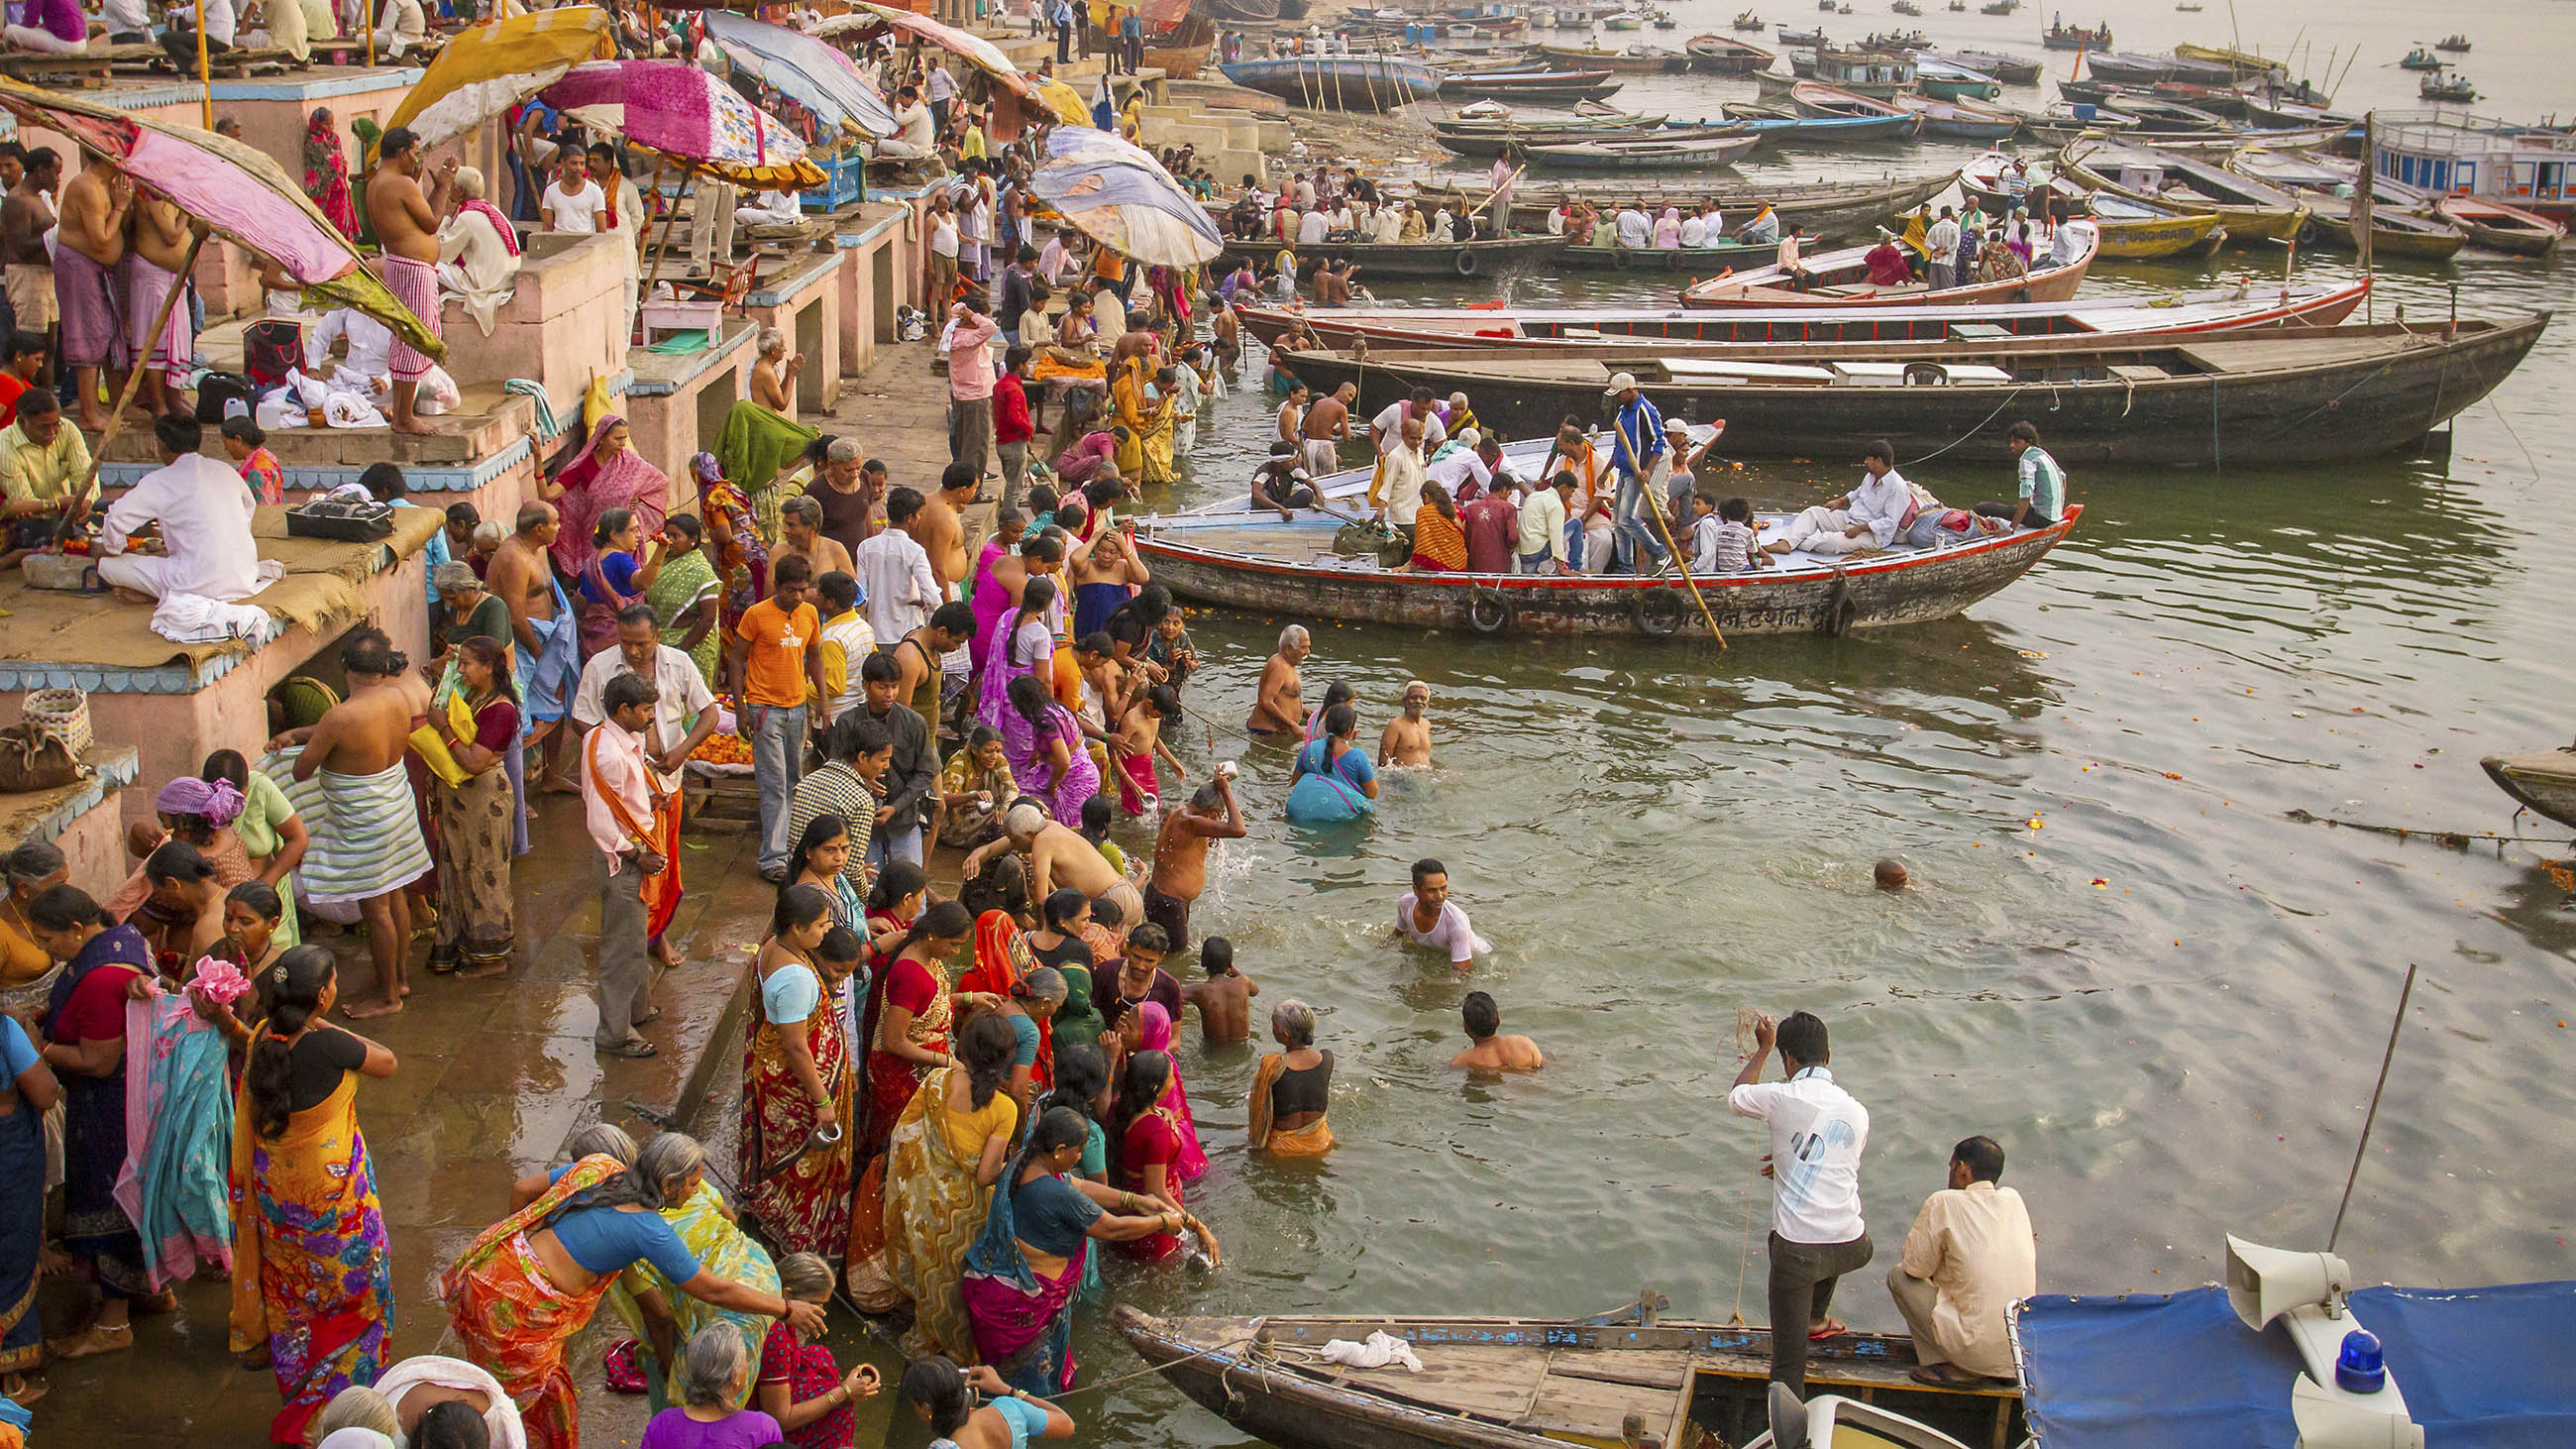 India's Prime Minister has vowed to clean up the Ganges River. But officials have been trying for thirty years.